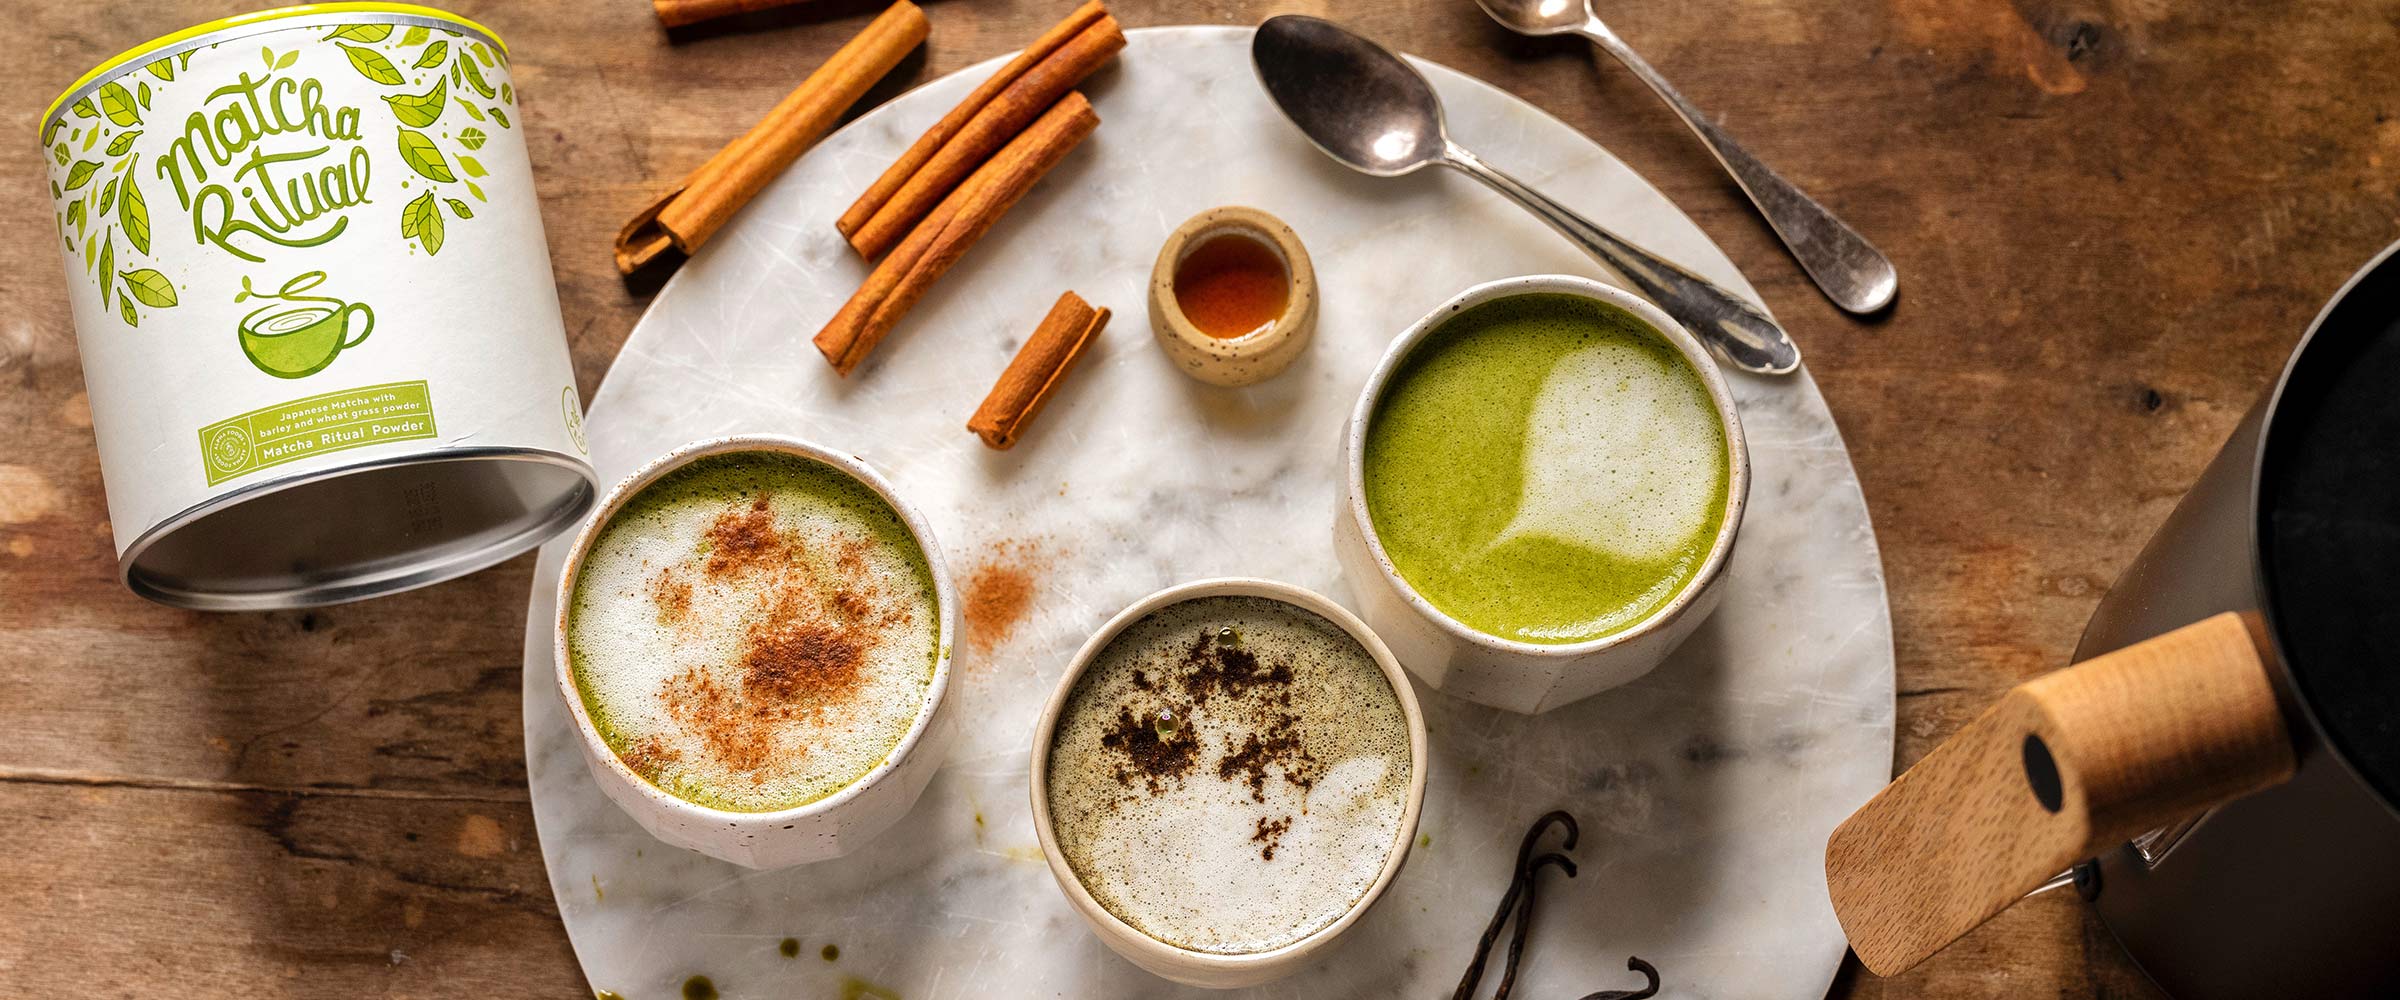 How to make matcha latte: 3 delicious variations